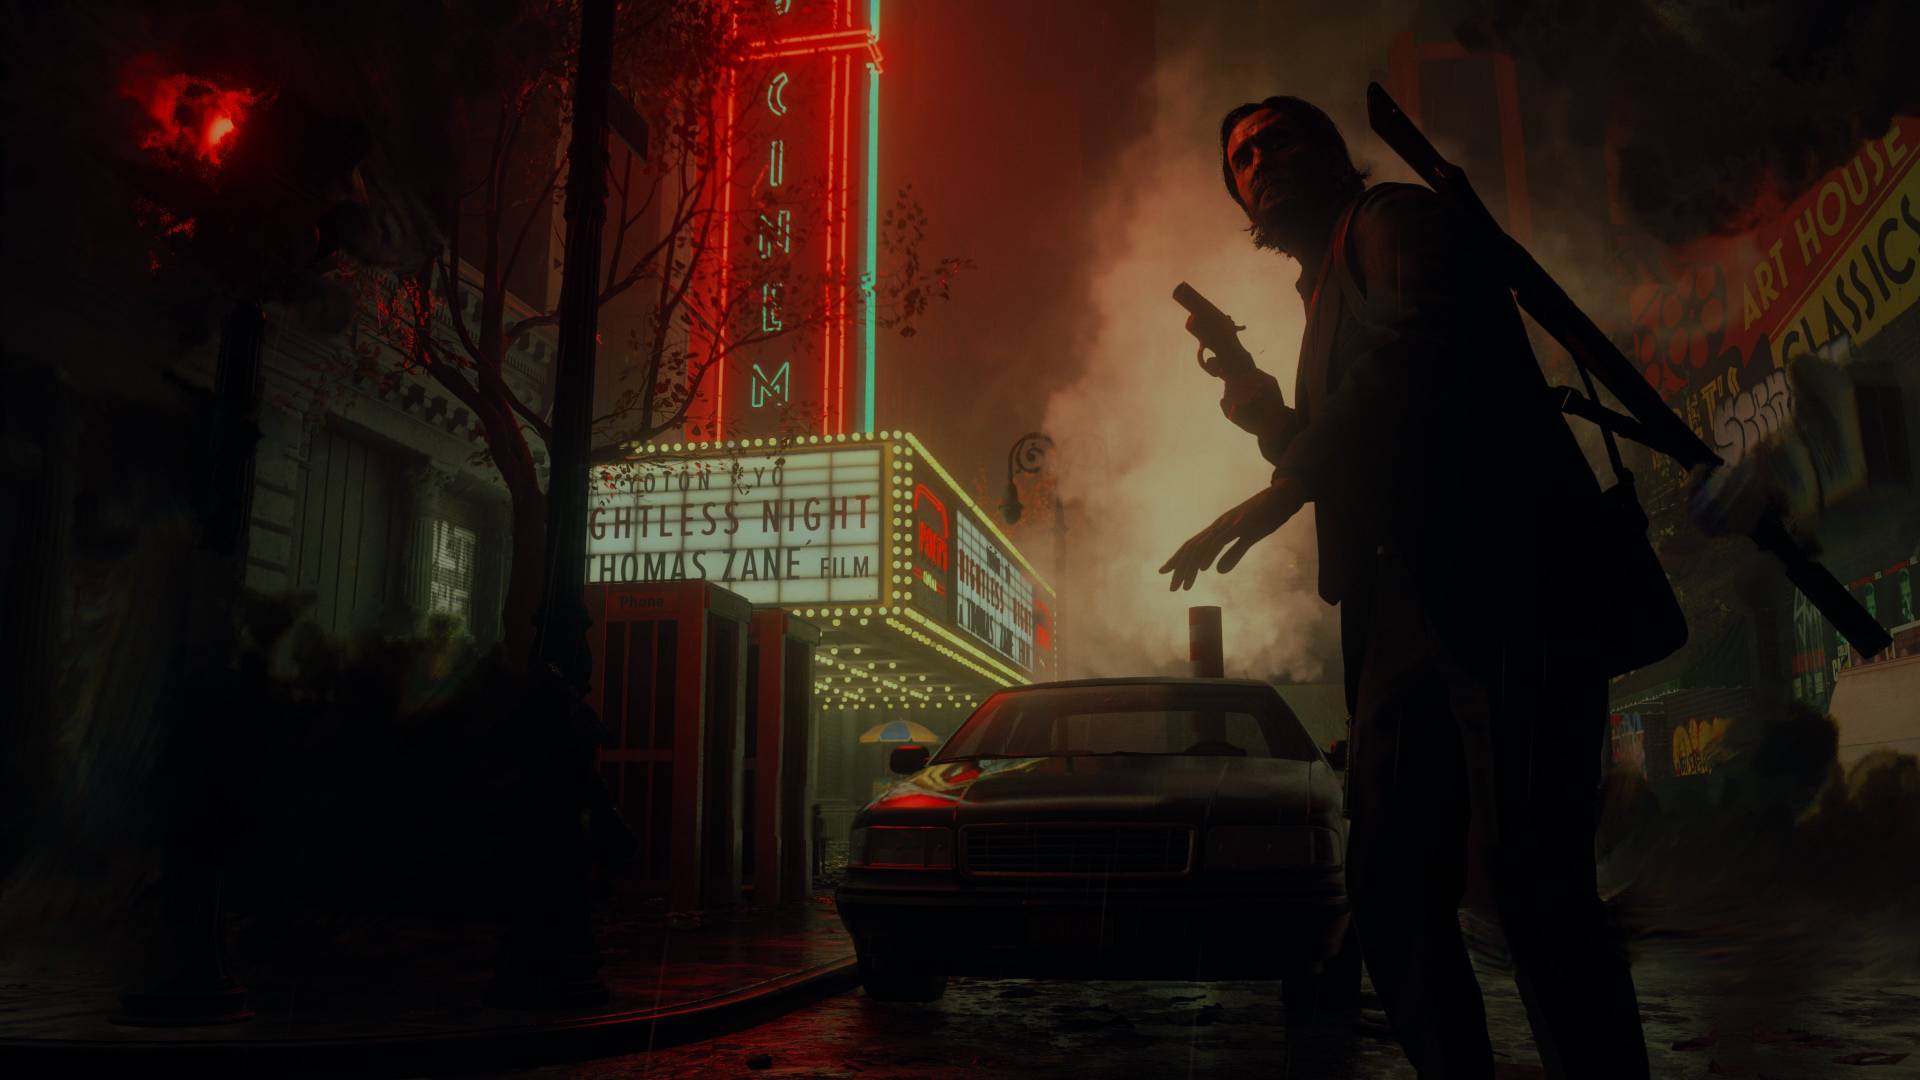 When does the Alan Wake 2 review embargo lift? - Dot Esports